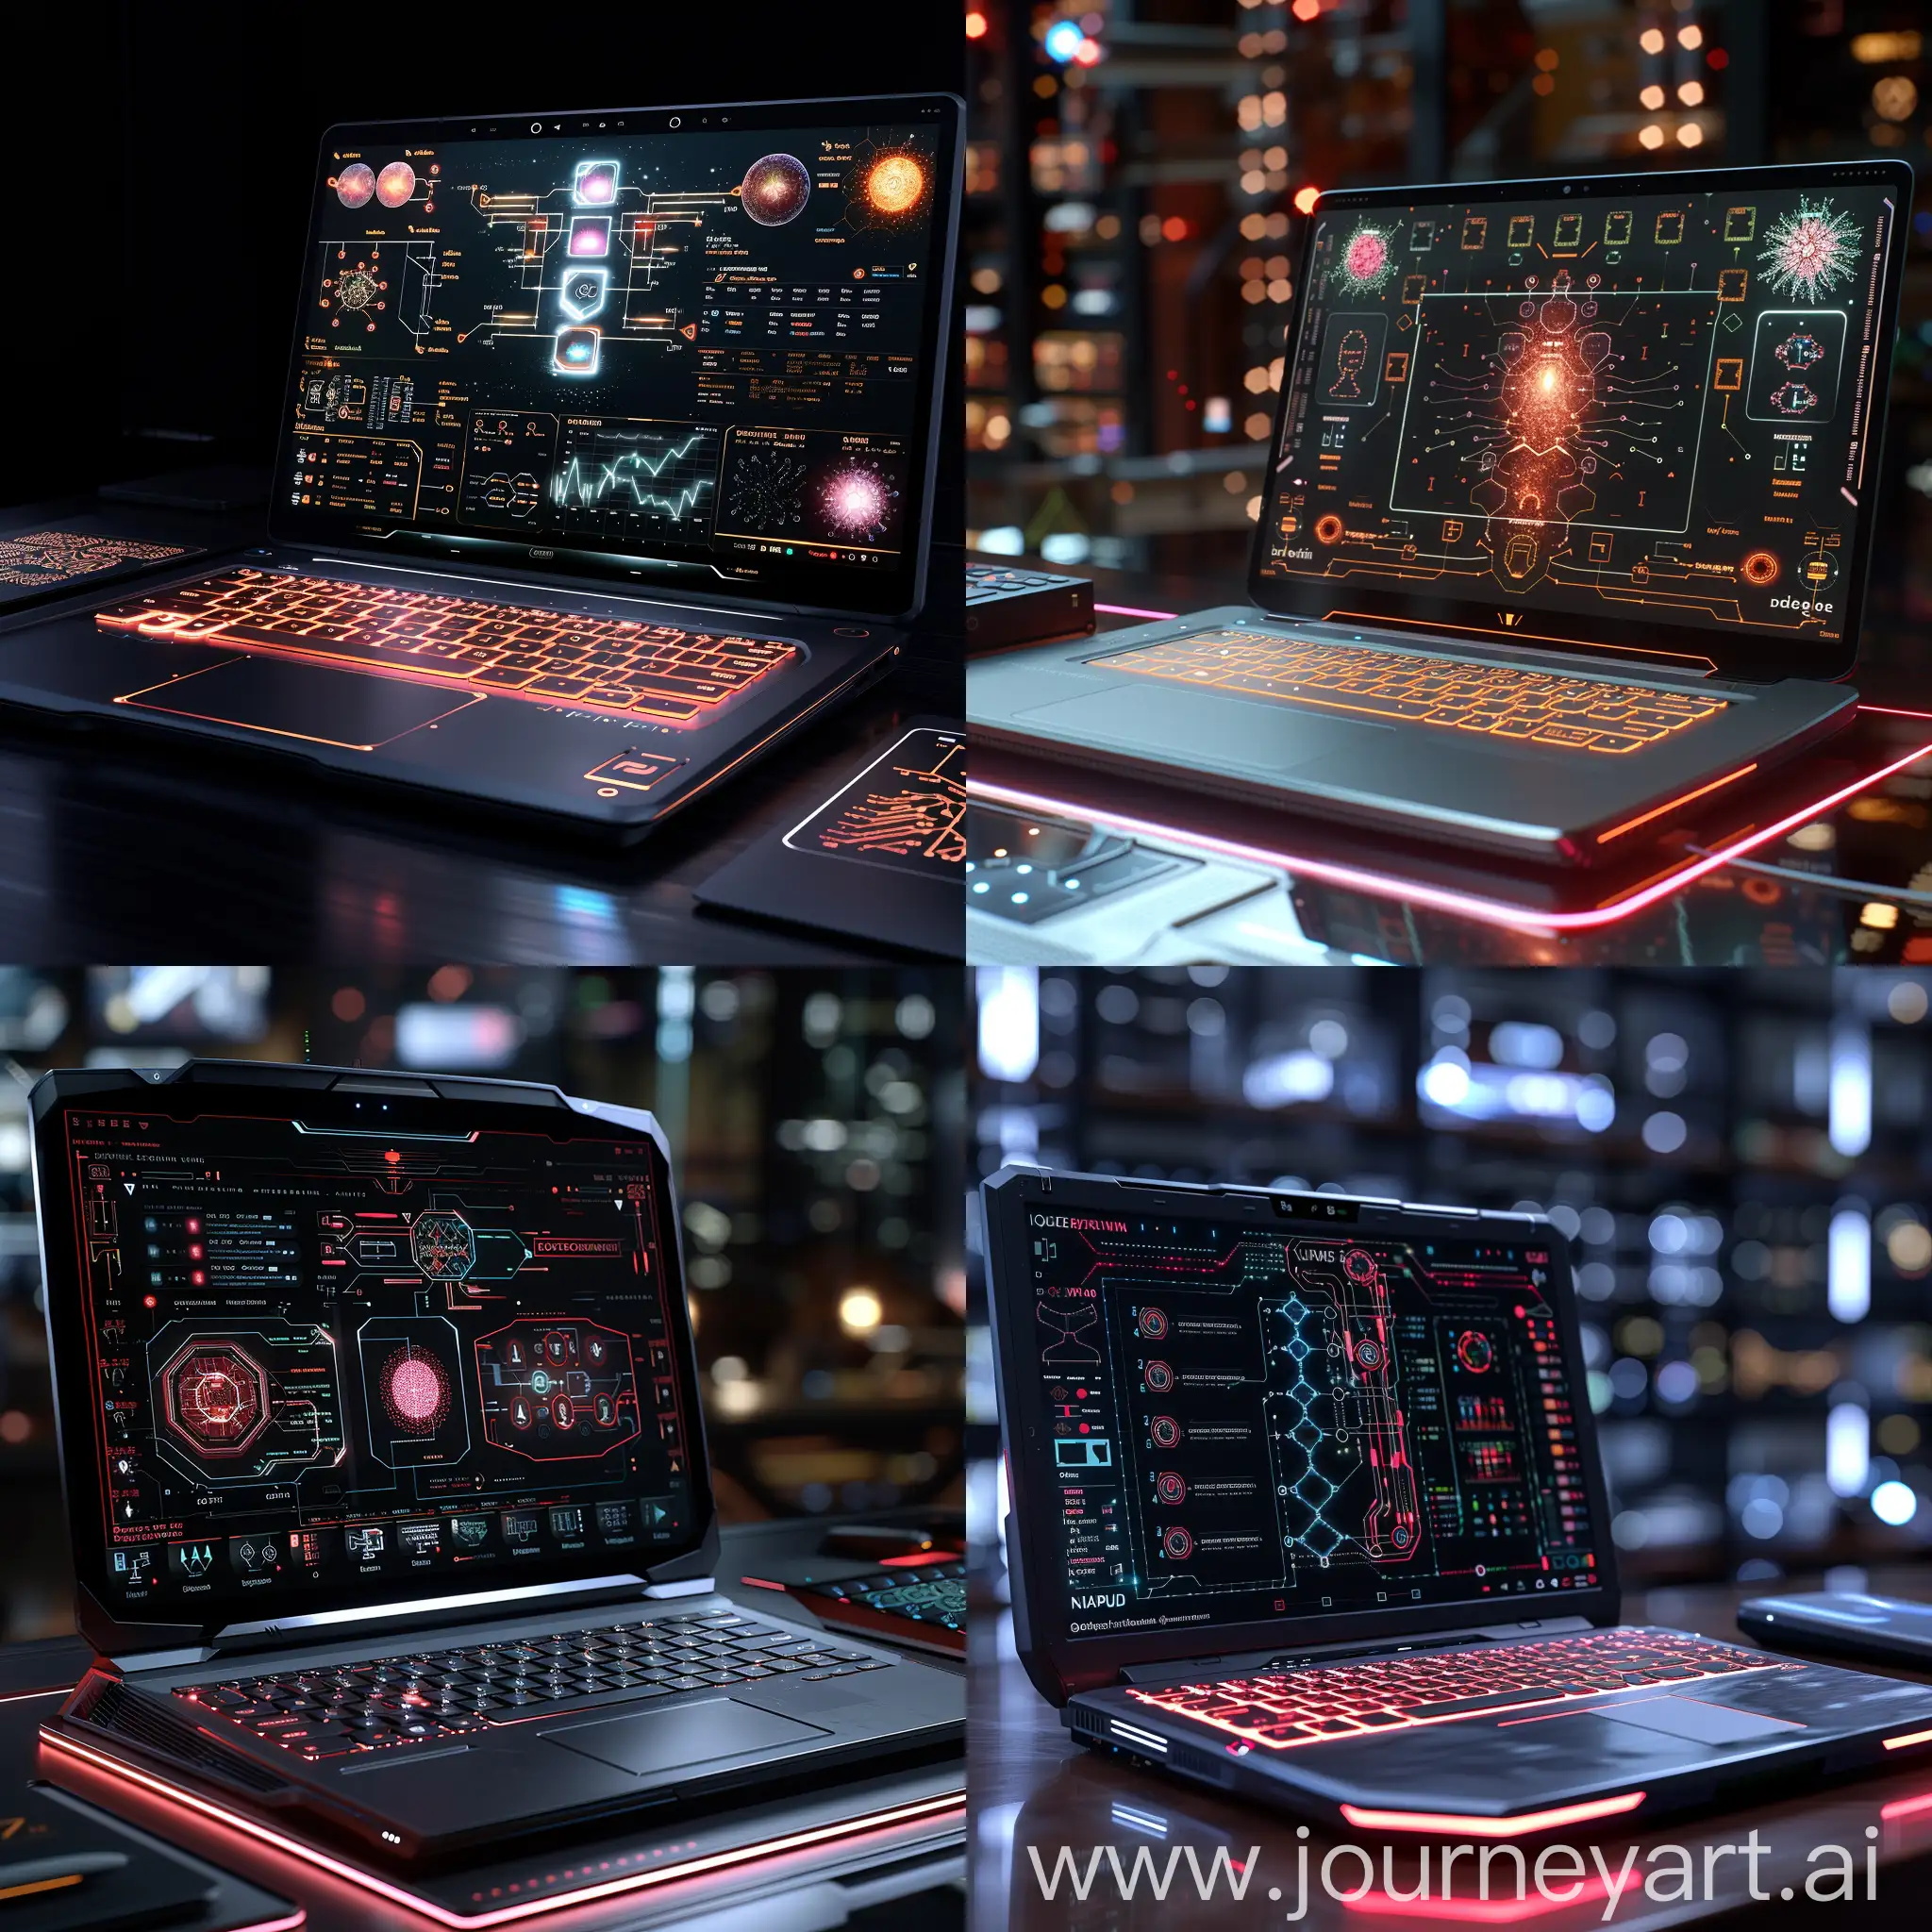 Futuristic-Quantum-Laptop-with-Holographic-Display-and-SelfRepairing-Components